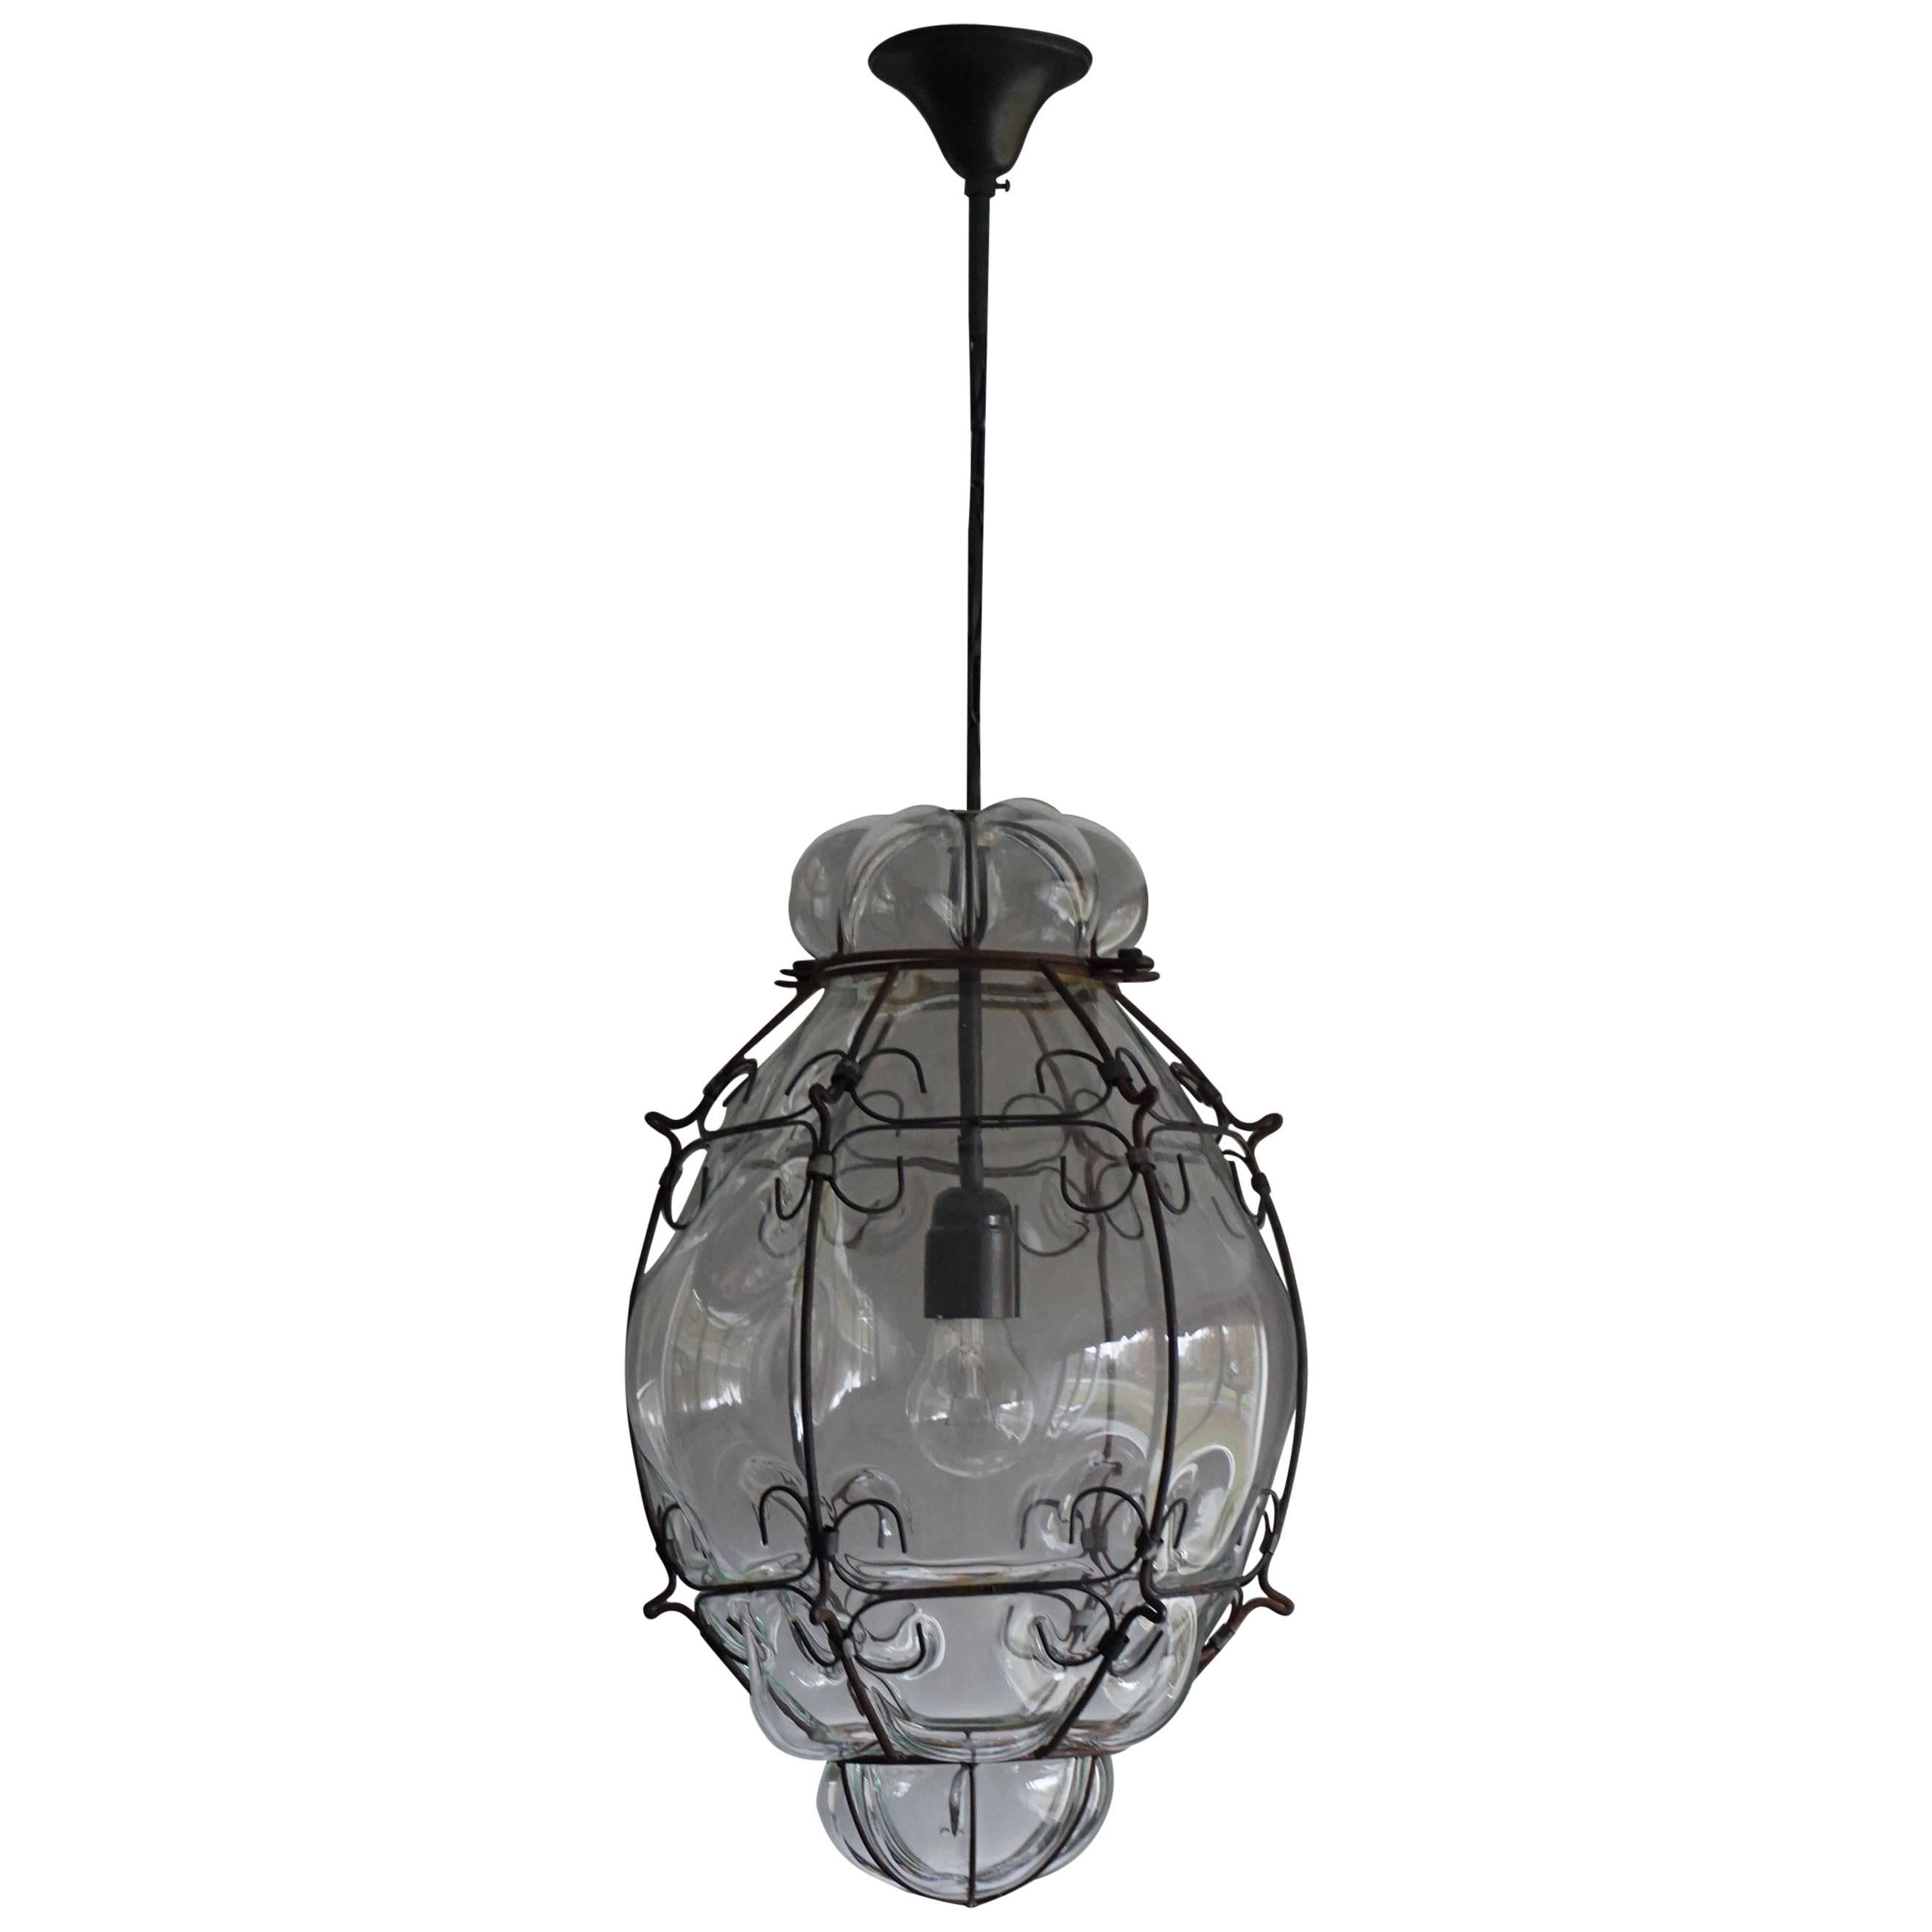 Stylish and Handcrafted Venetian Pendant Blown Glass in Metal Frame Ceiling Lamp For Sale